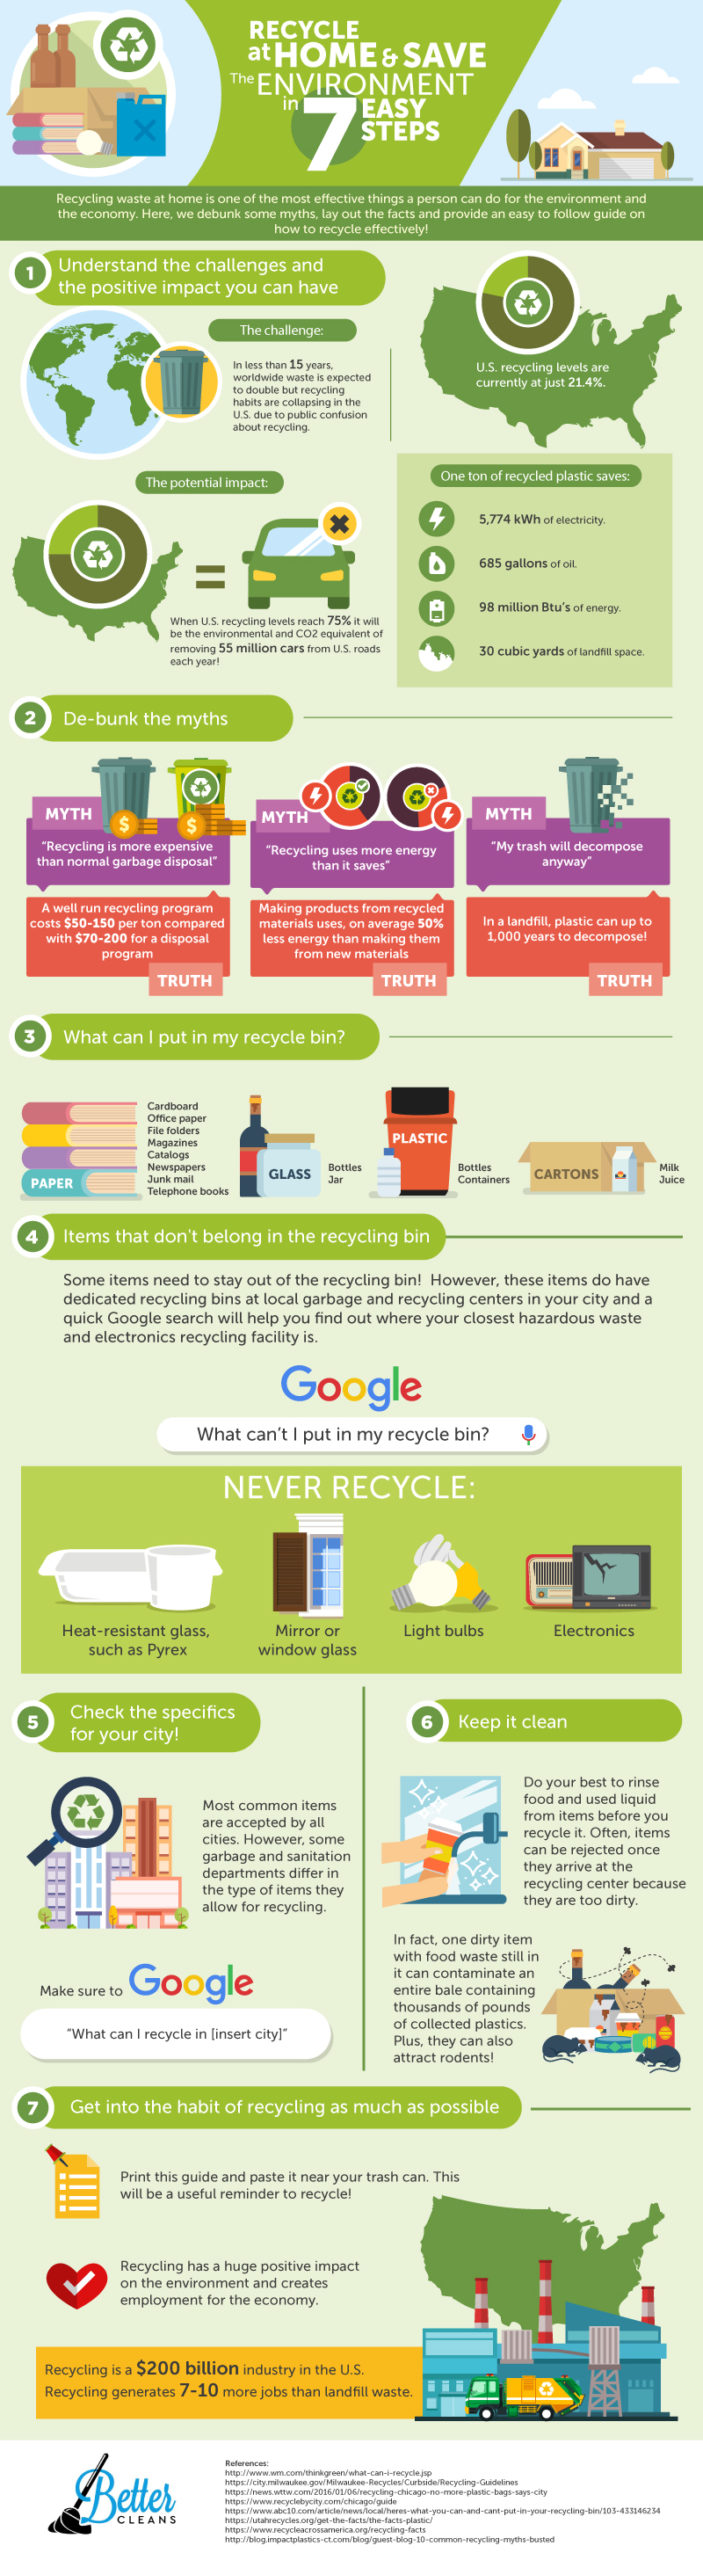 Recycling Basics That Can Be Done At Home